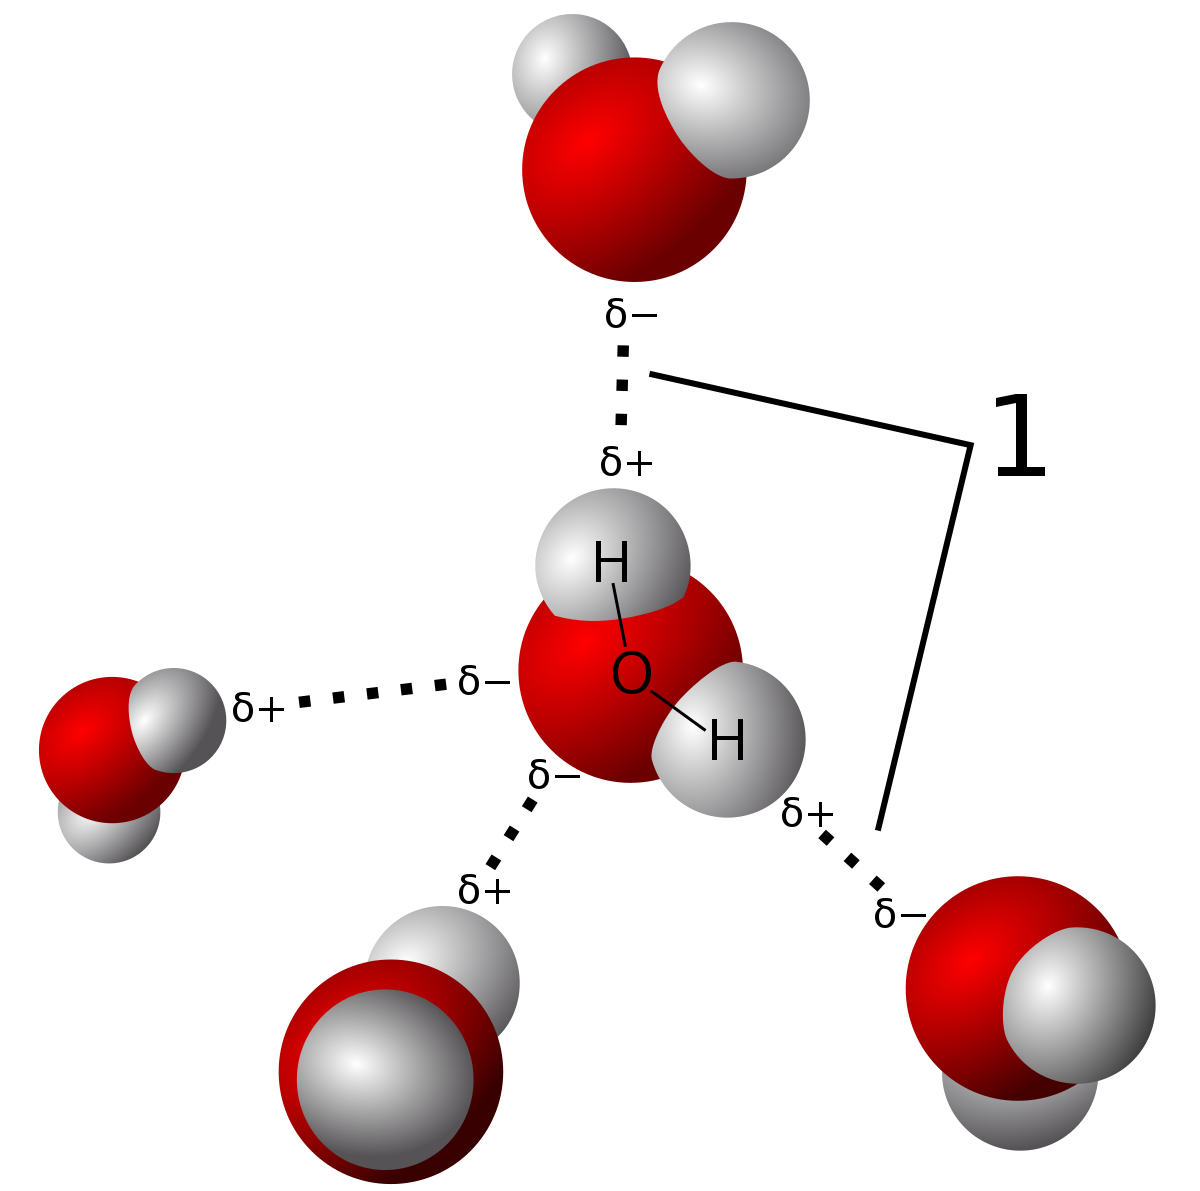 The Lewis Dot Structure for H2O